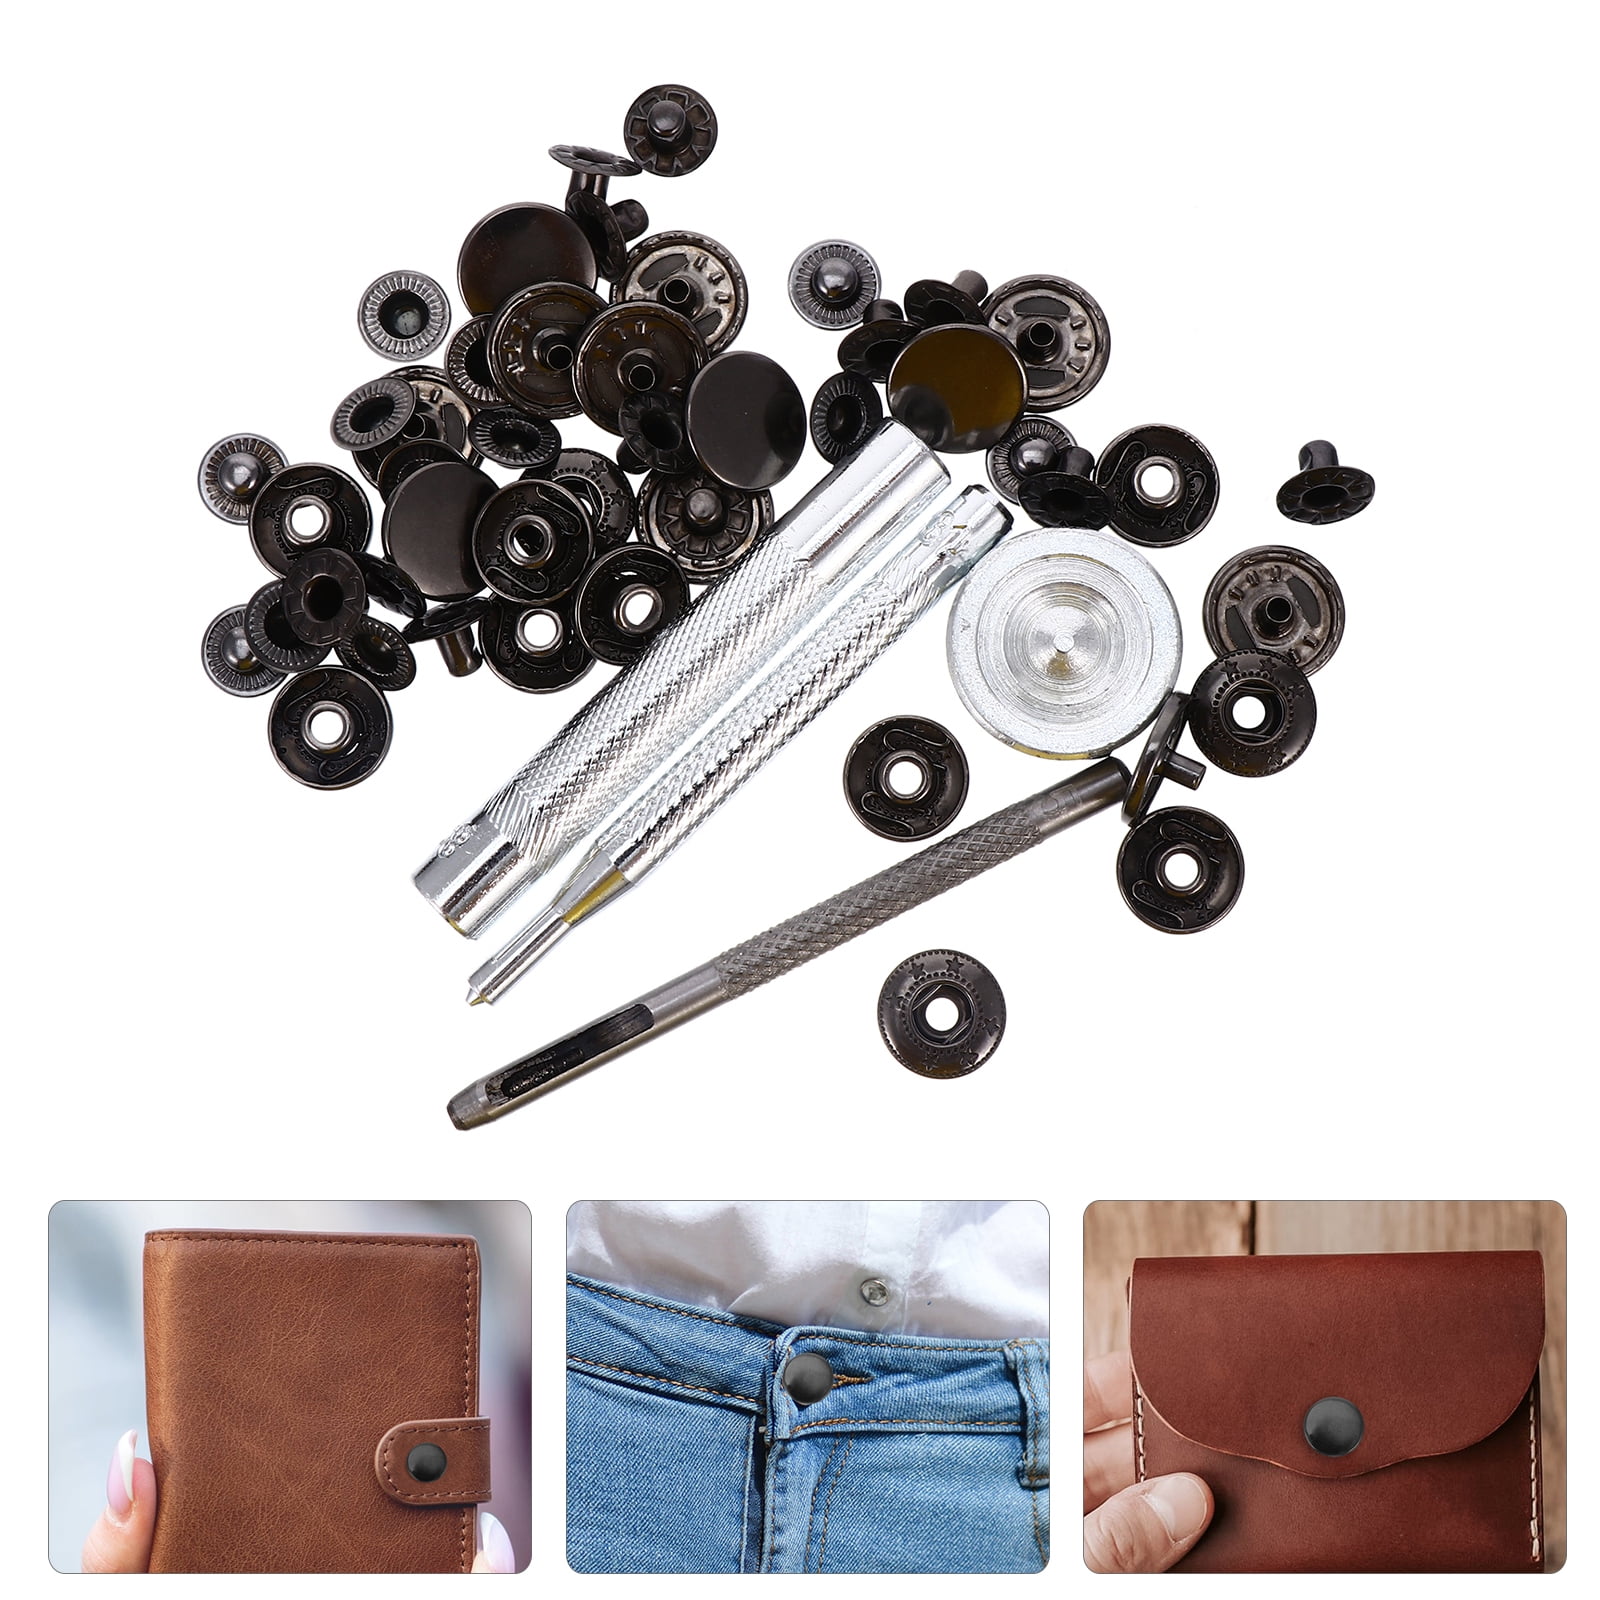 12 Sets Premium Brass Heavy Duty Leather Snap Fasteners Kit, 15mm Metal  Snap Buttons Kit Press Studs Leather Rivets And Snaps For Clothing,  Leather, J